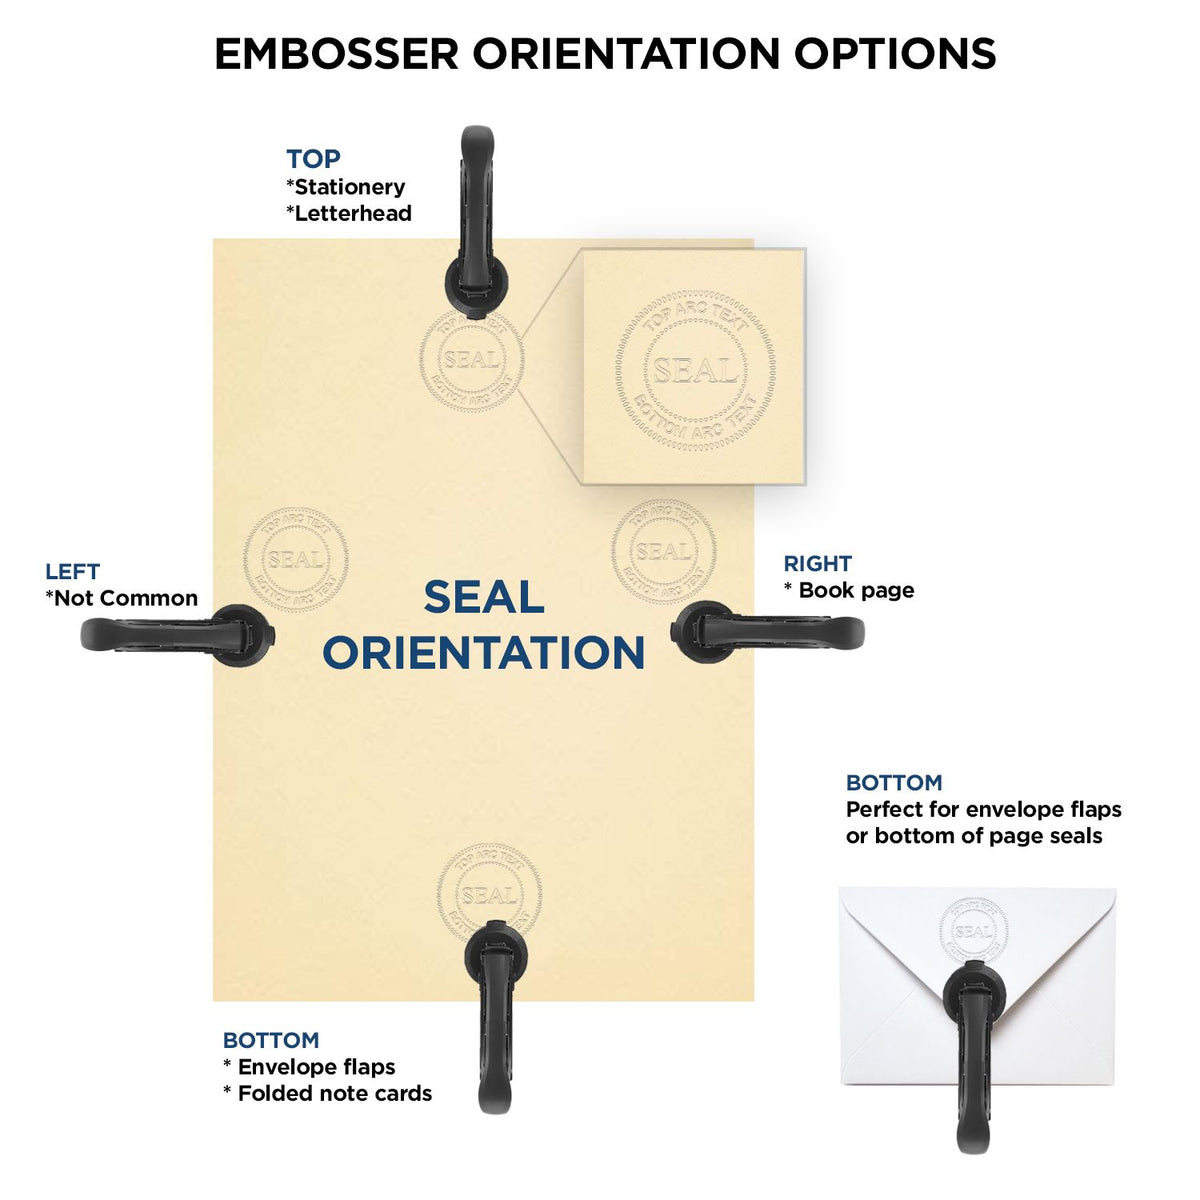 An infographic for the State of Mississippi Extended Long Reach Geologist Seal showing embosser orientation, this is showing examples of a top, bottom, right and left insert.